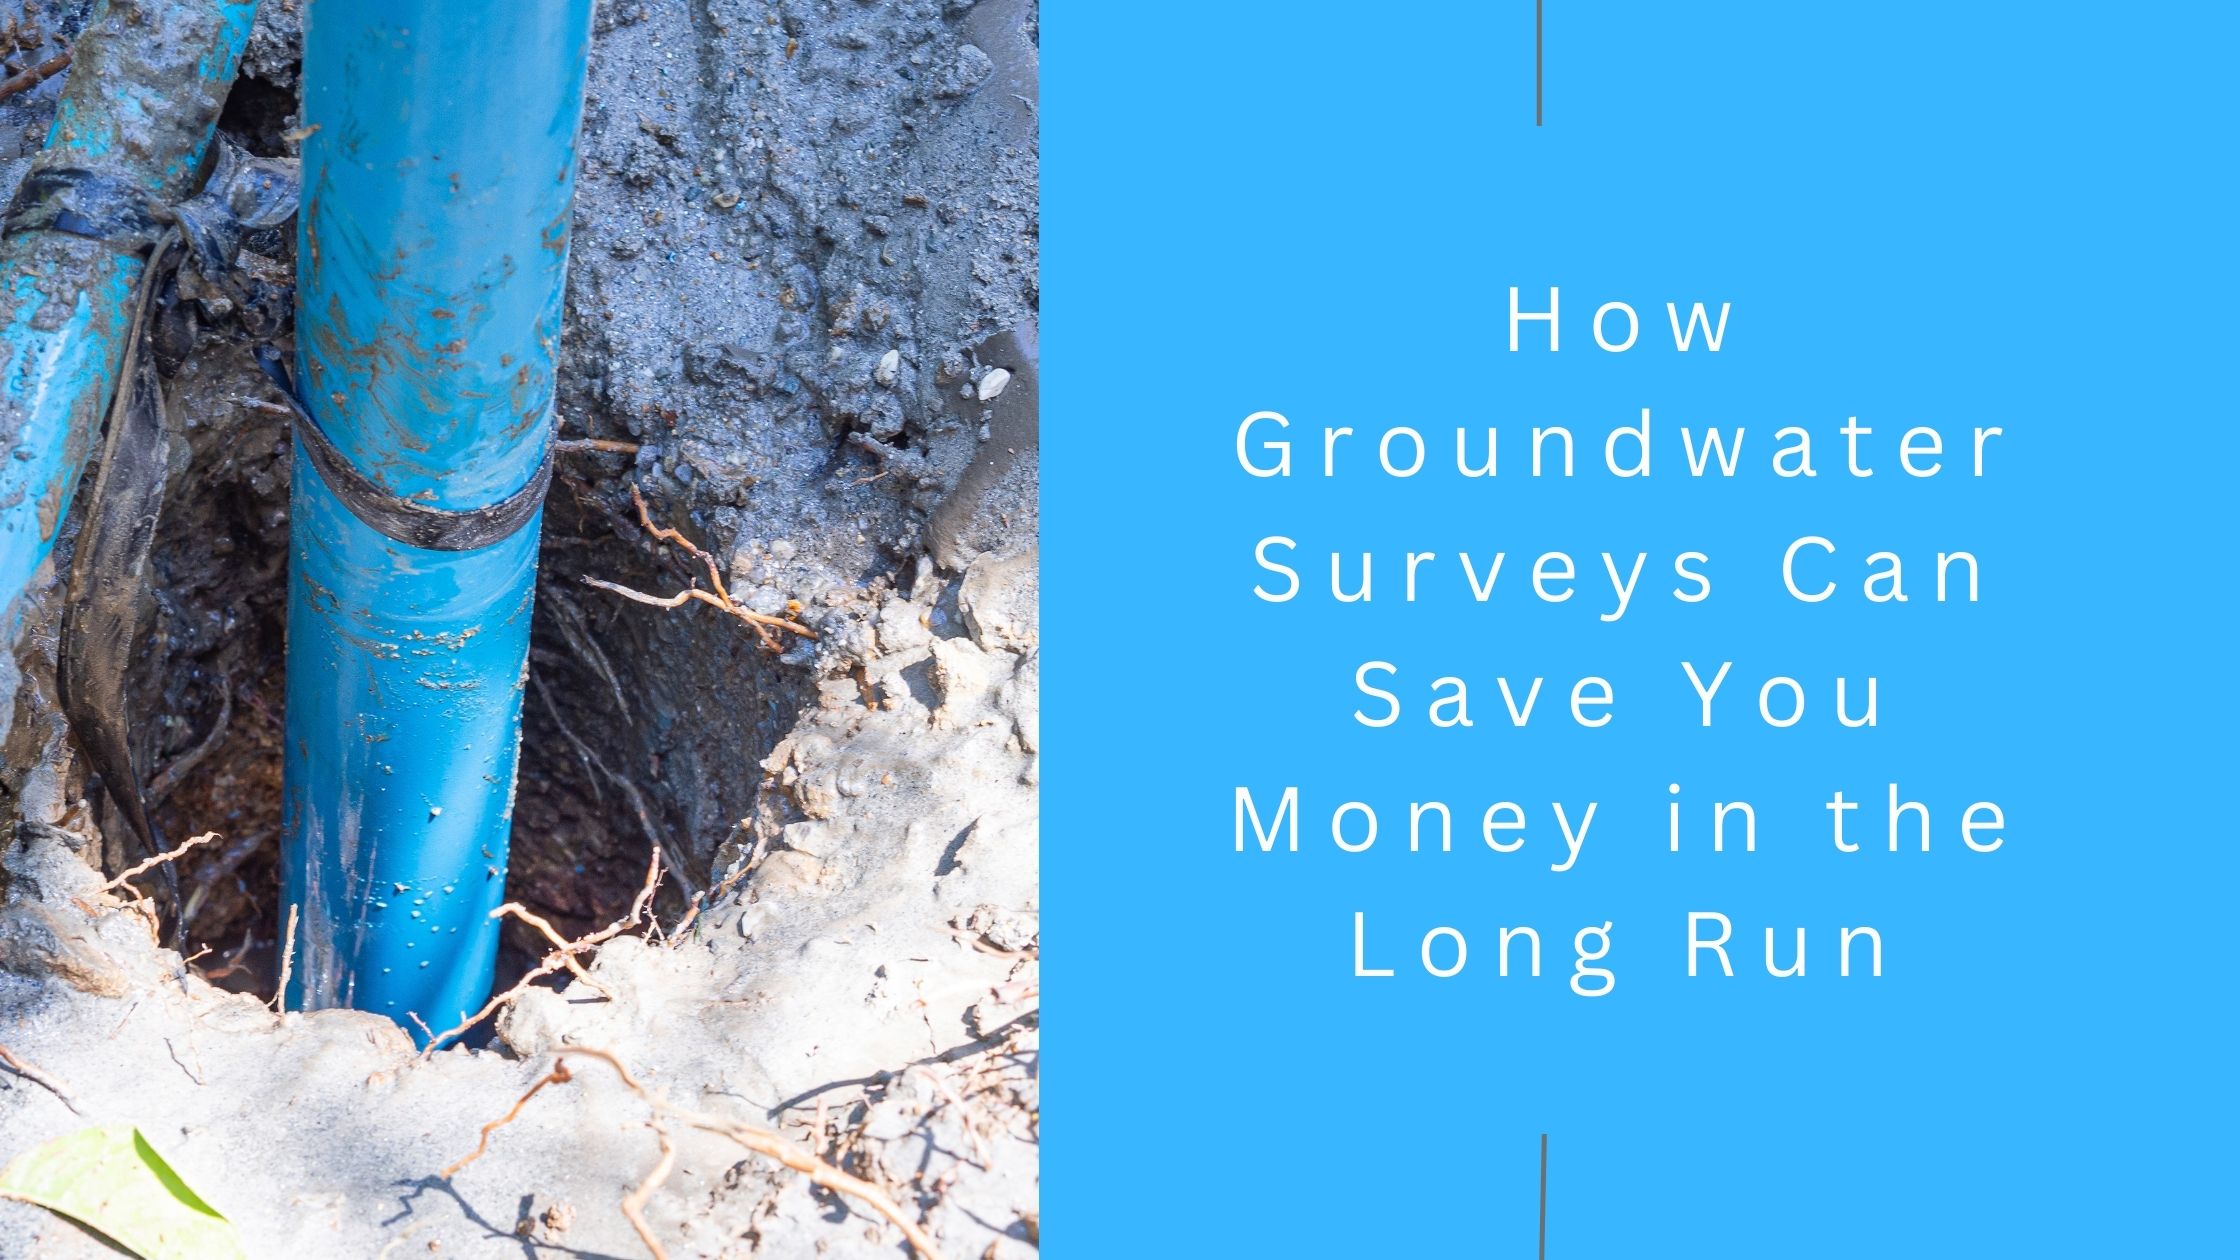 How Groundwater Surveys Can Save You Money in the Long Run